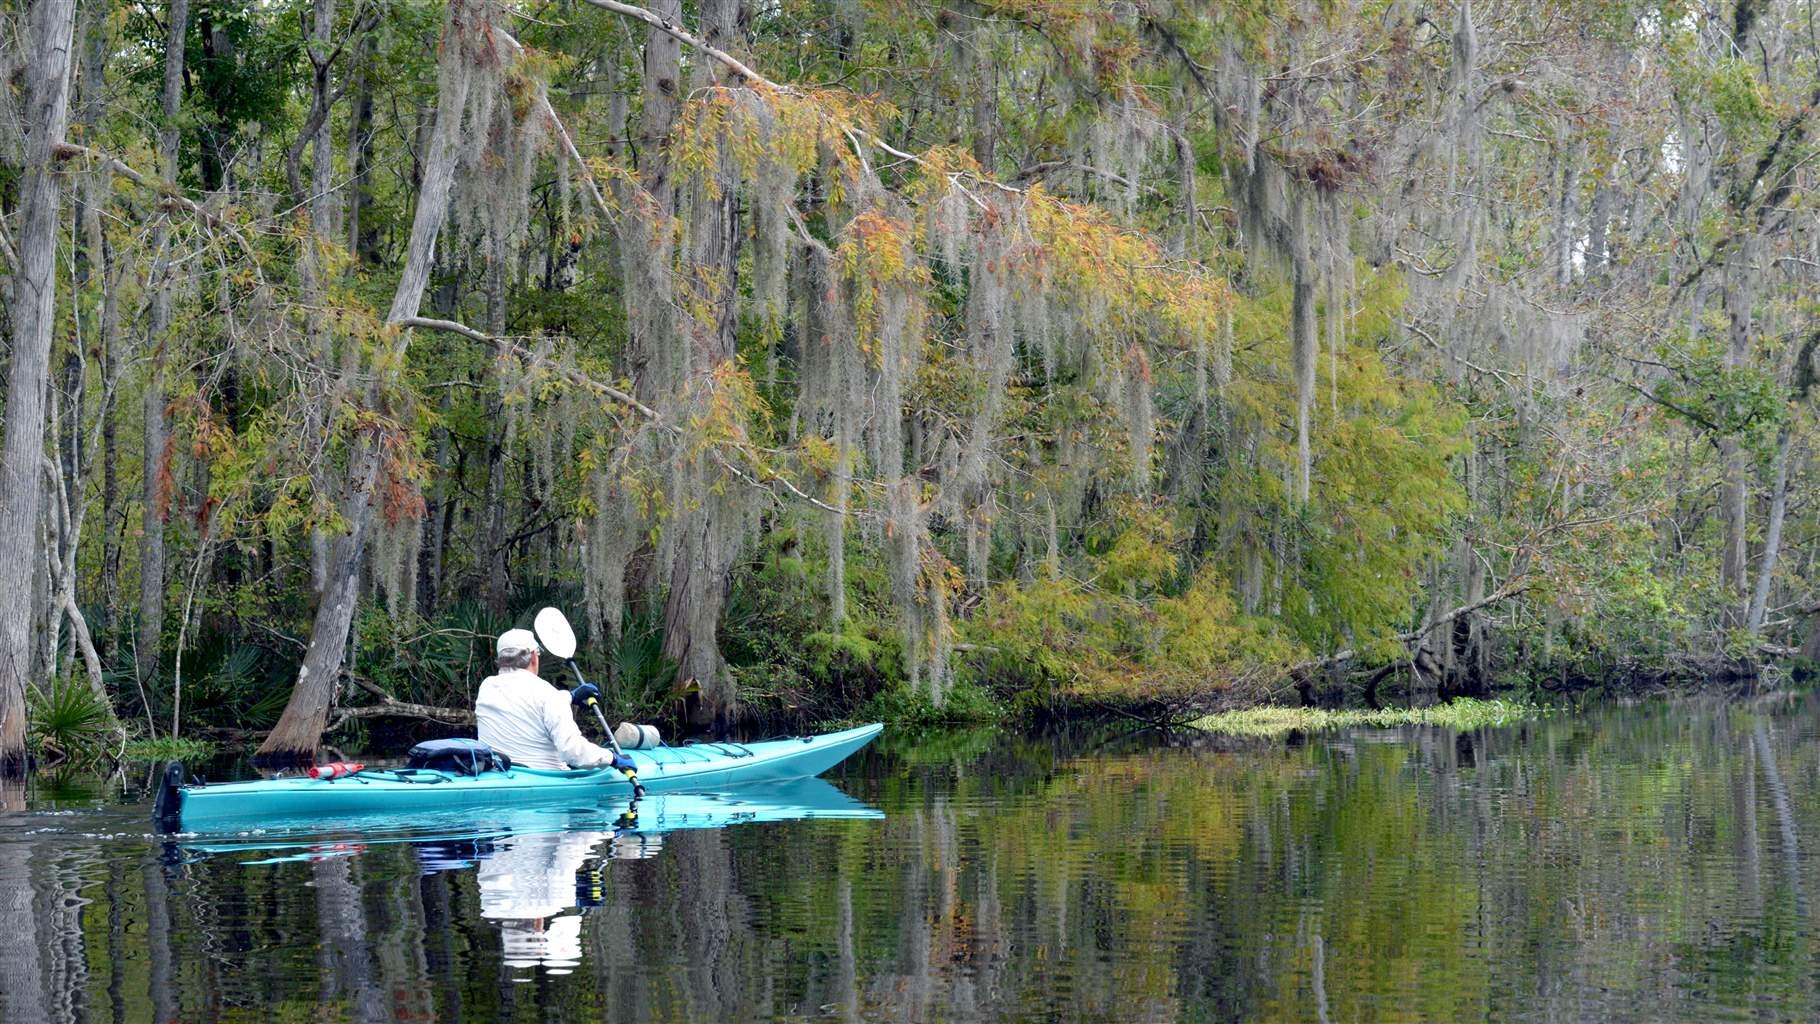 A person in a white long-sleeve shirt paddles a light-blue kayak through glassy waters fringed by the tall, skinny trees and hanging mosses characteristic of a southern U.S. swamp. 